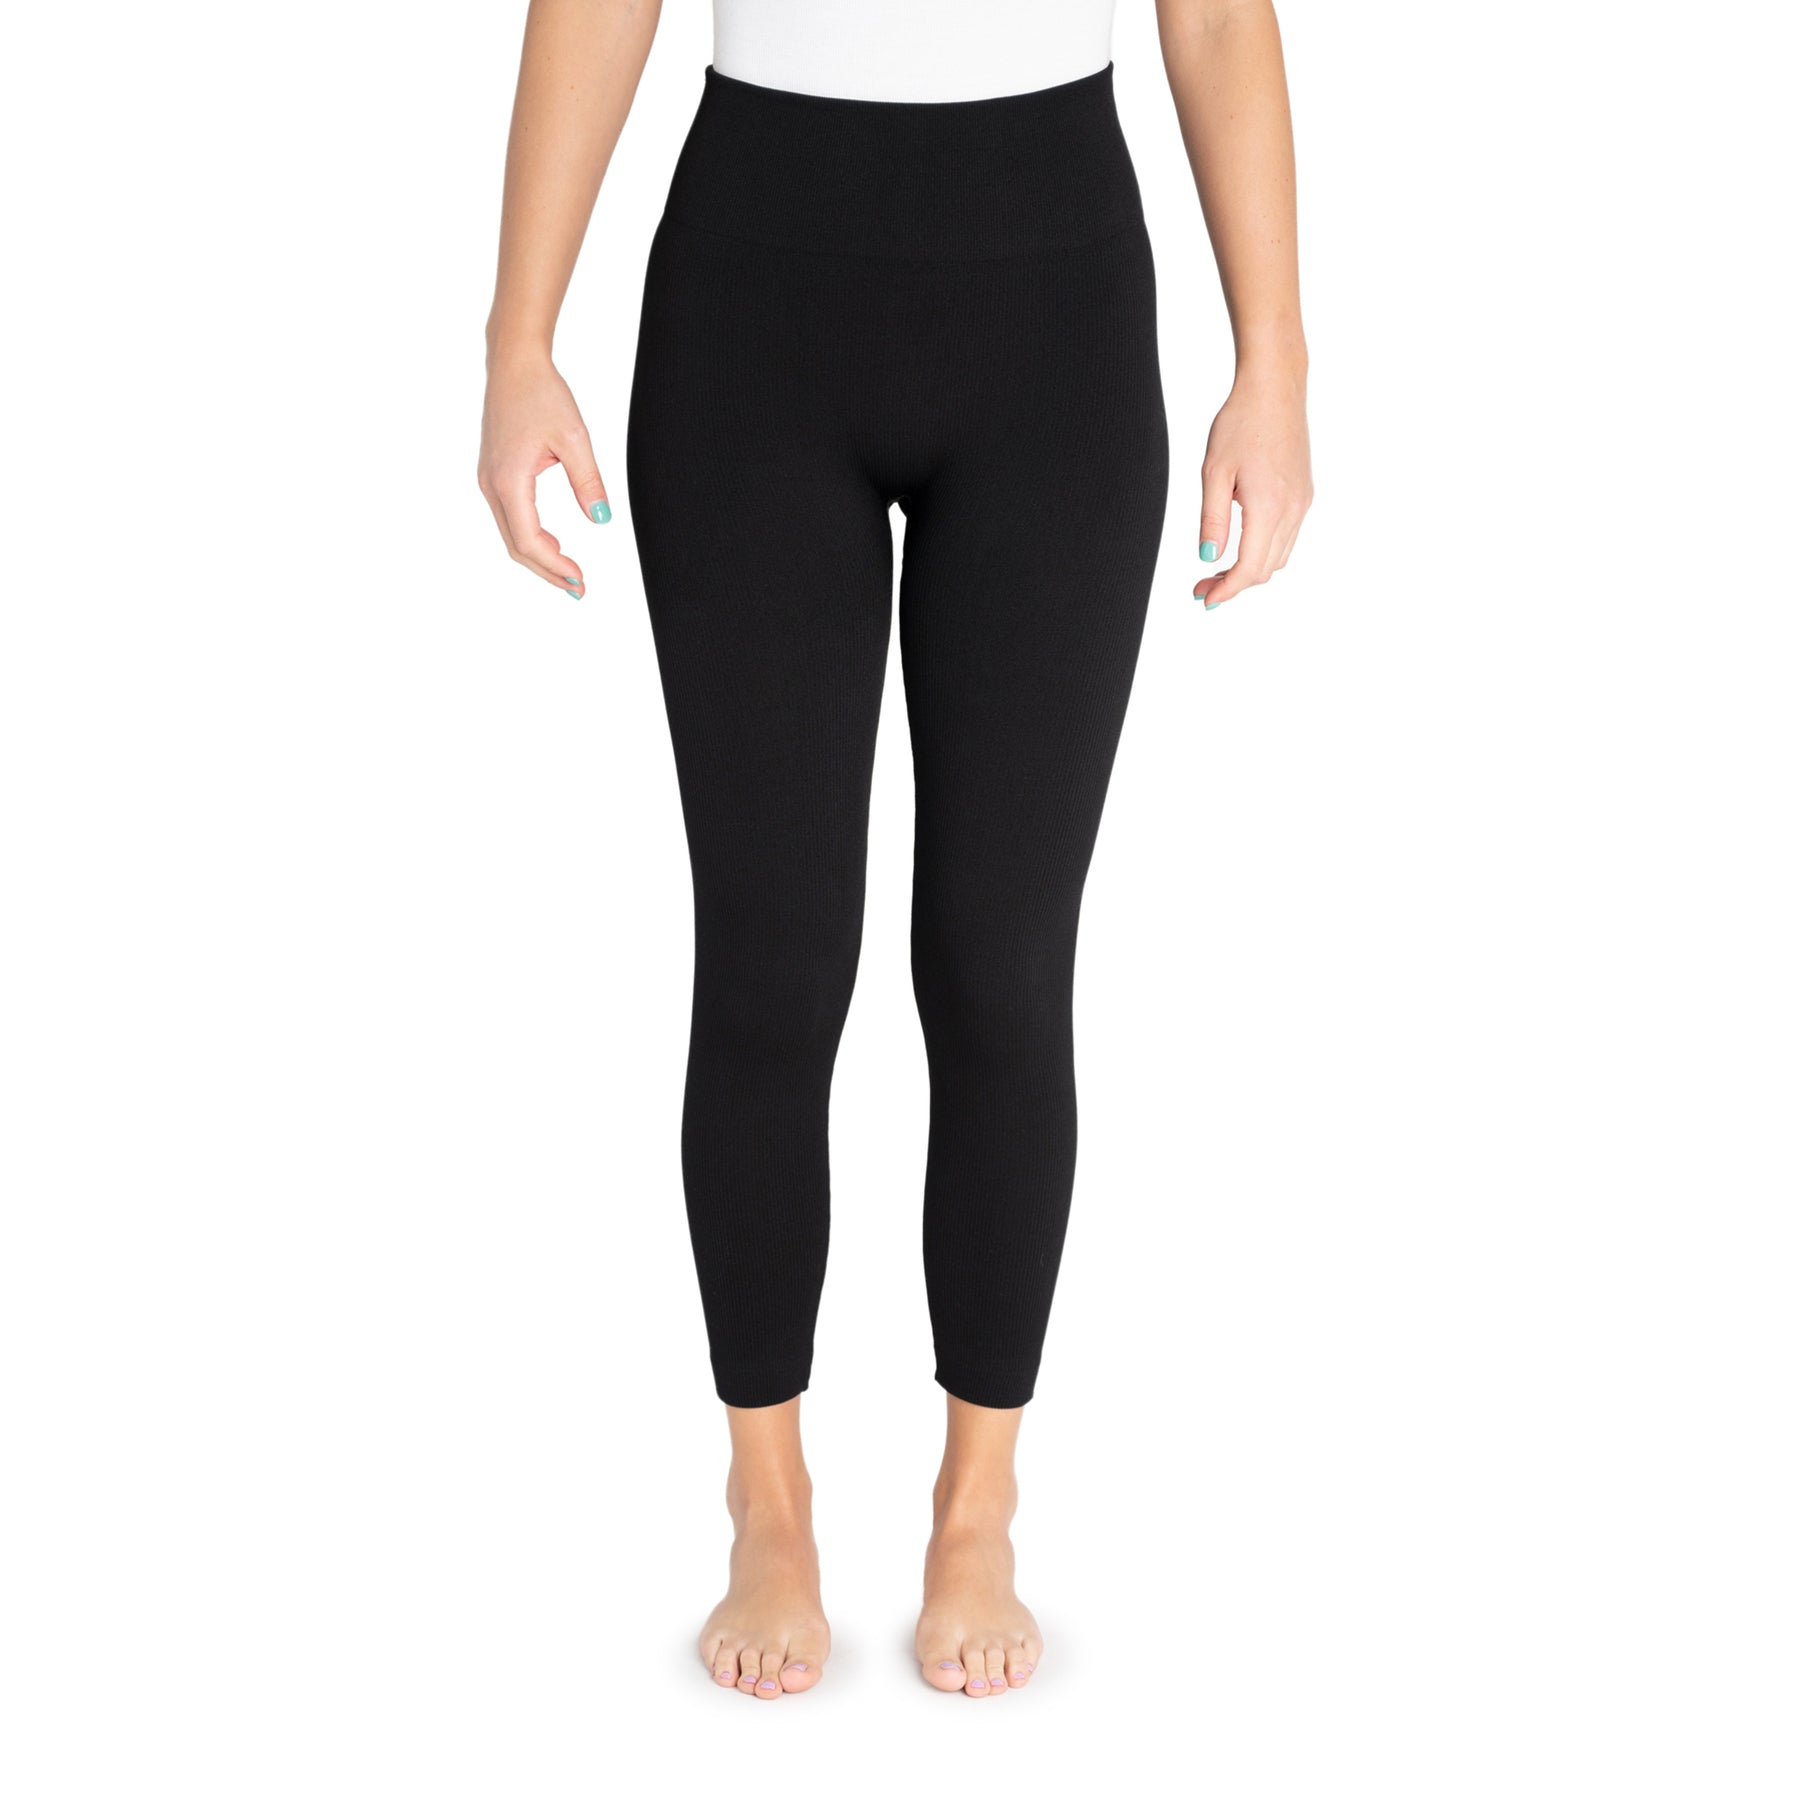 High Waist Fleece Lined Legging in Charcoal • Impressions Online